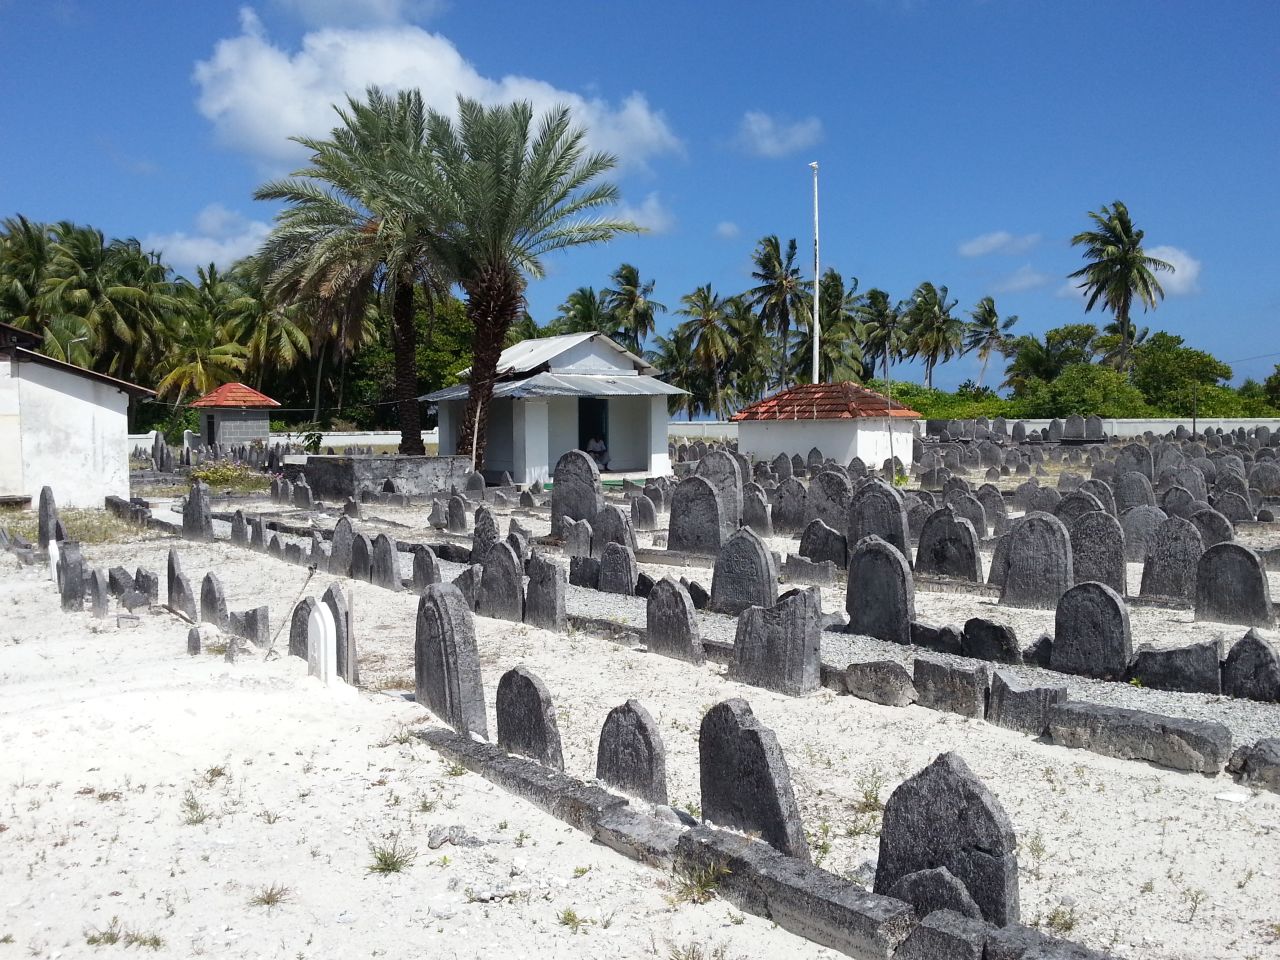 The World Monuments Fund added the Maldives' Koagannu Mosques and Cemetery, pictured, to its list of endangered spots for 2022.